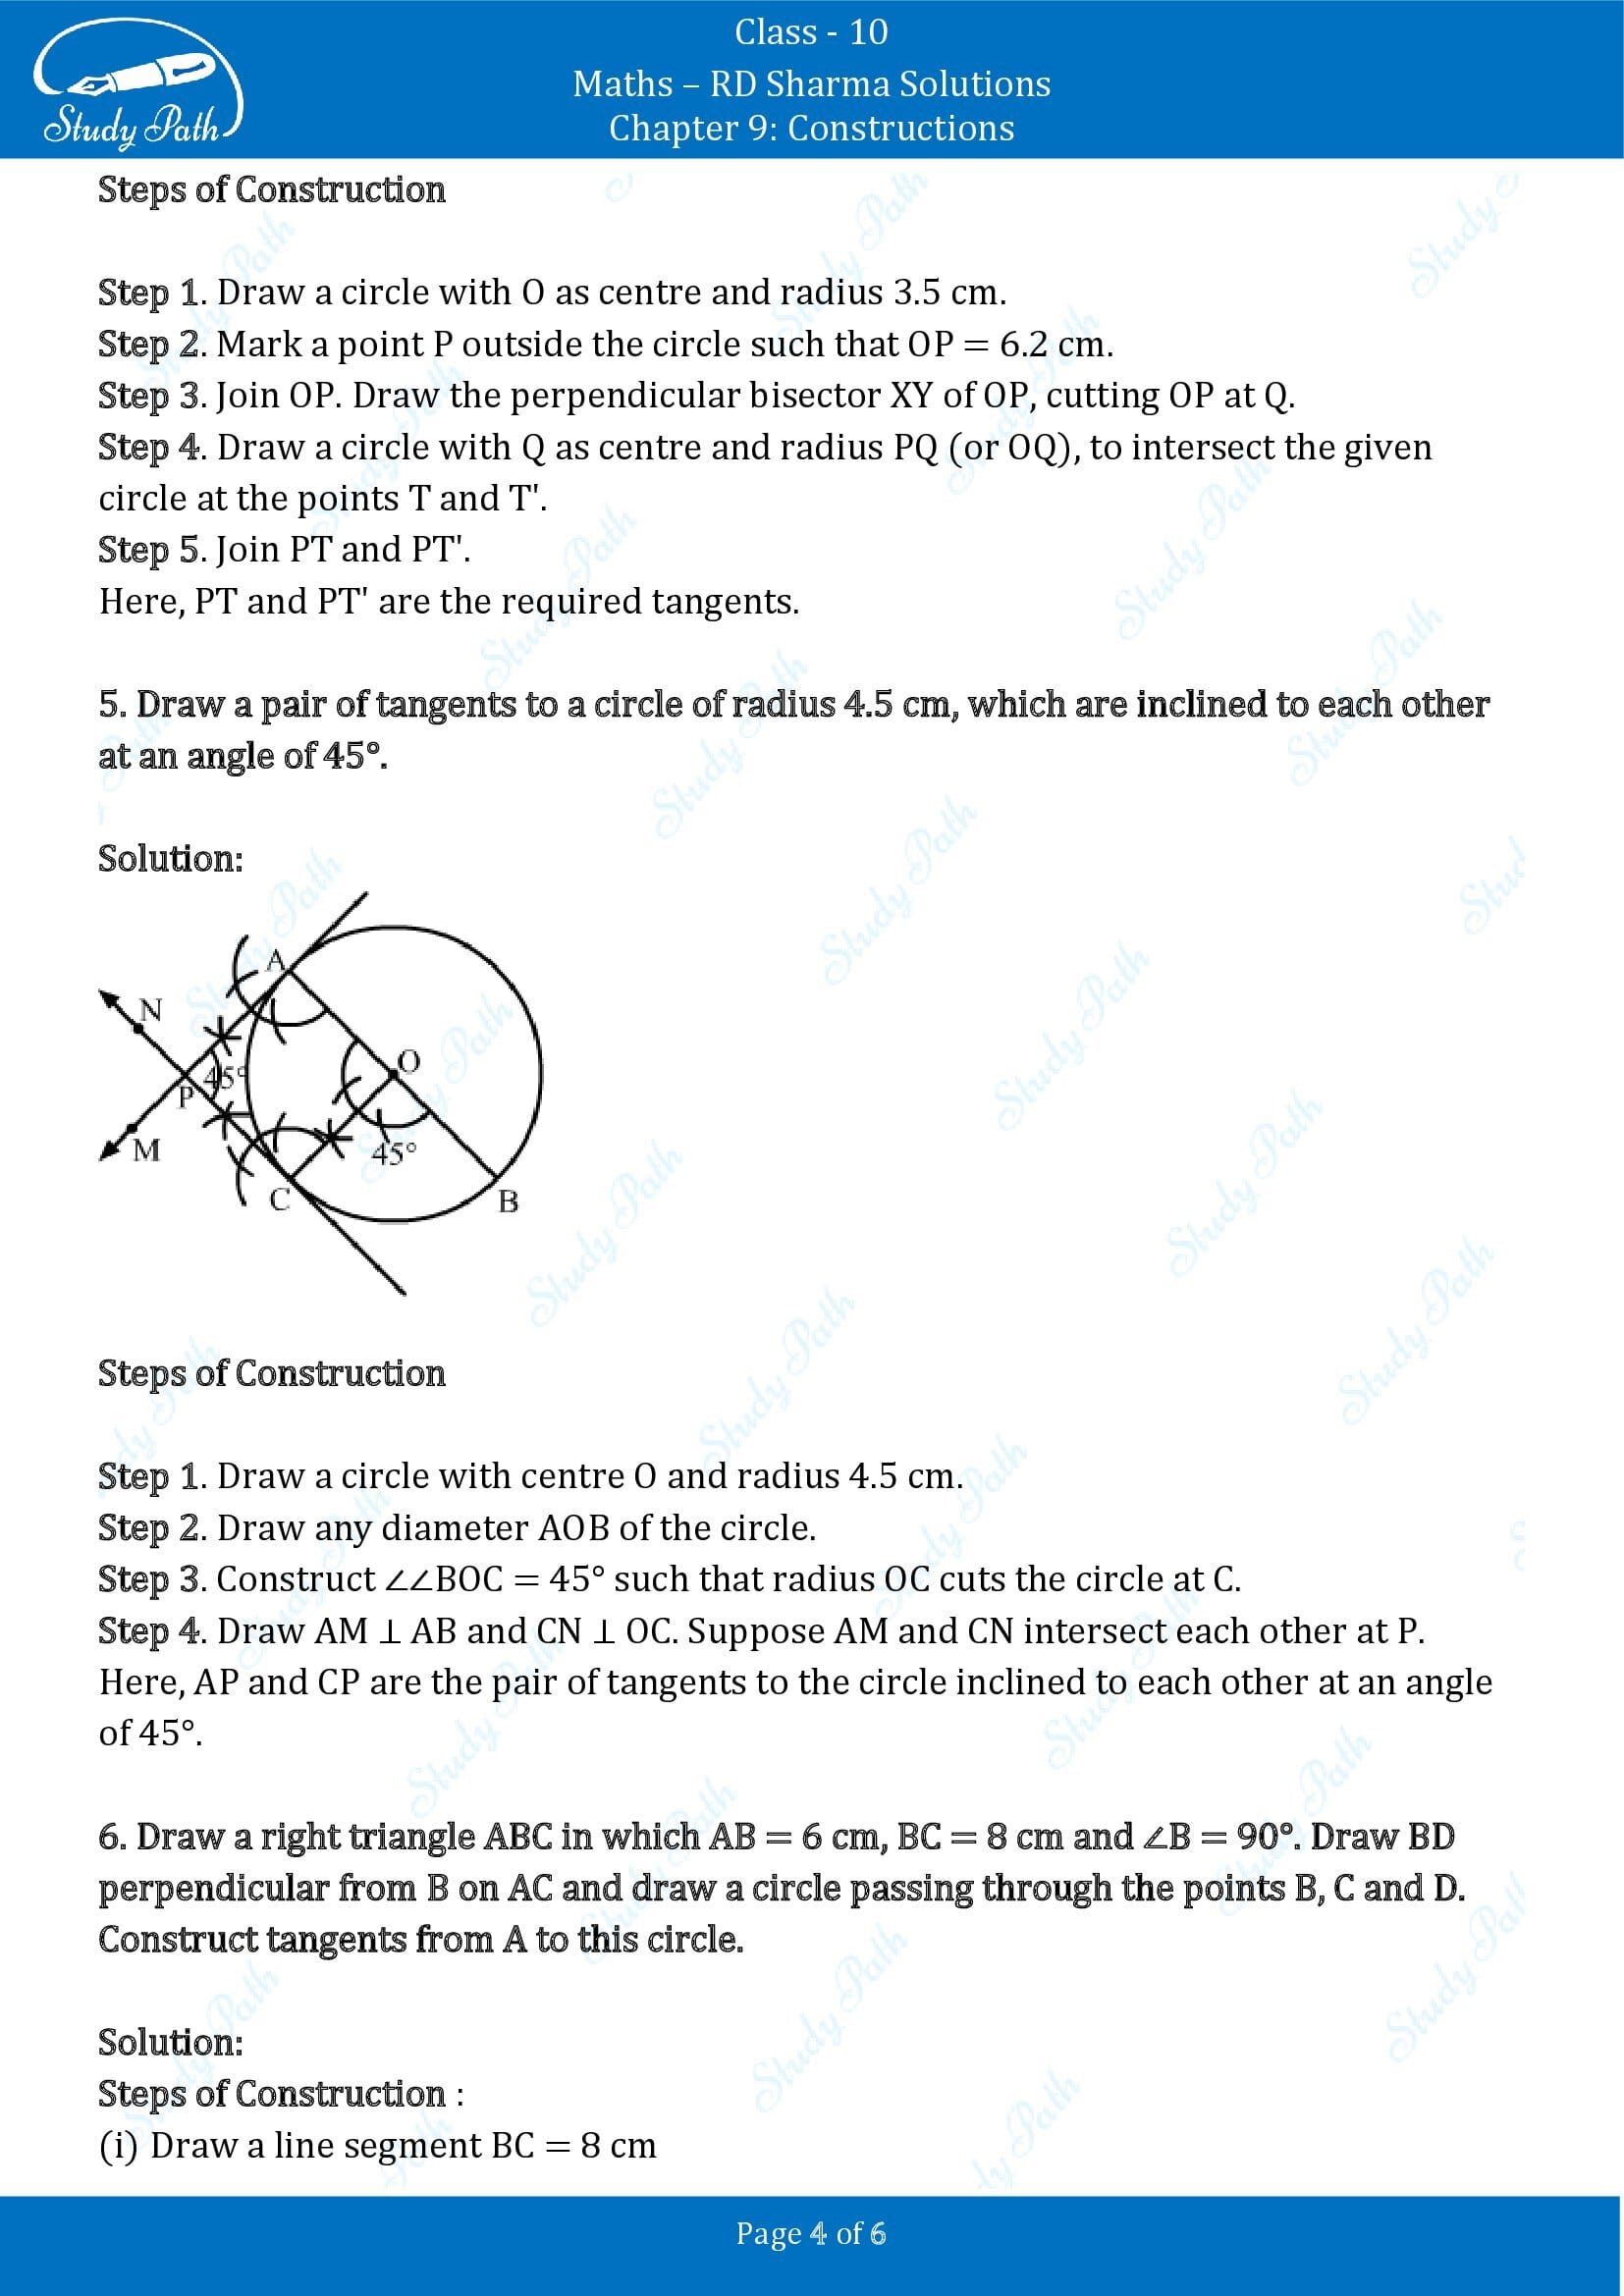 RD Sharma Solutions Class 10 Chapter 9 Constructions Exercise 9.3 00004